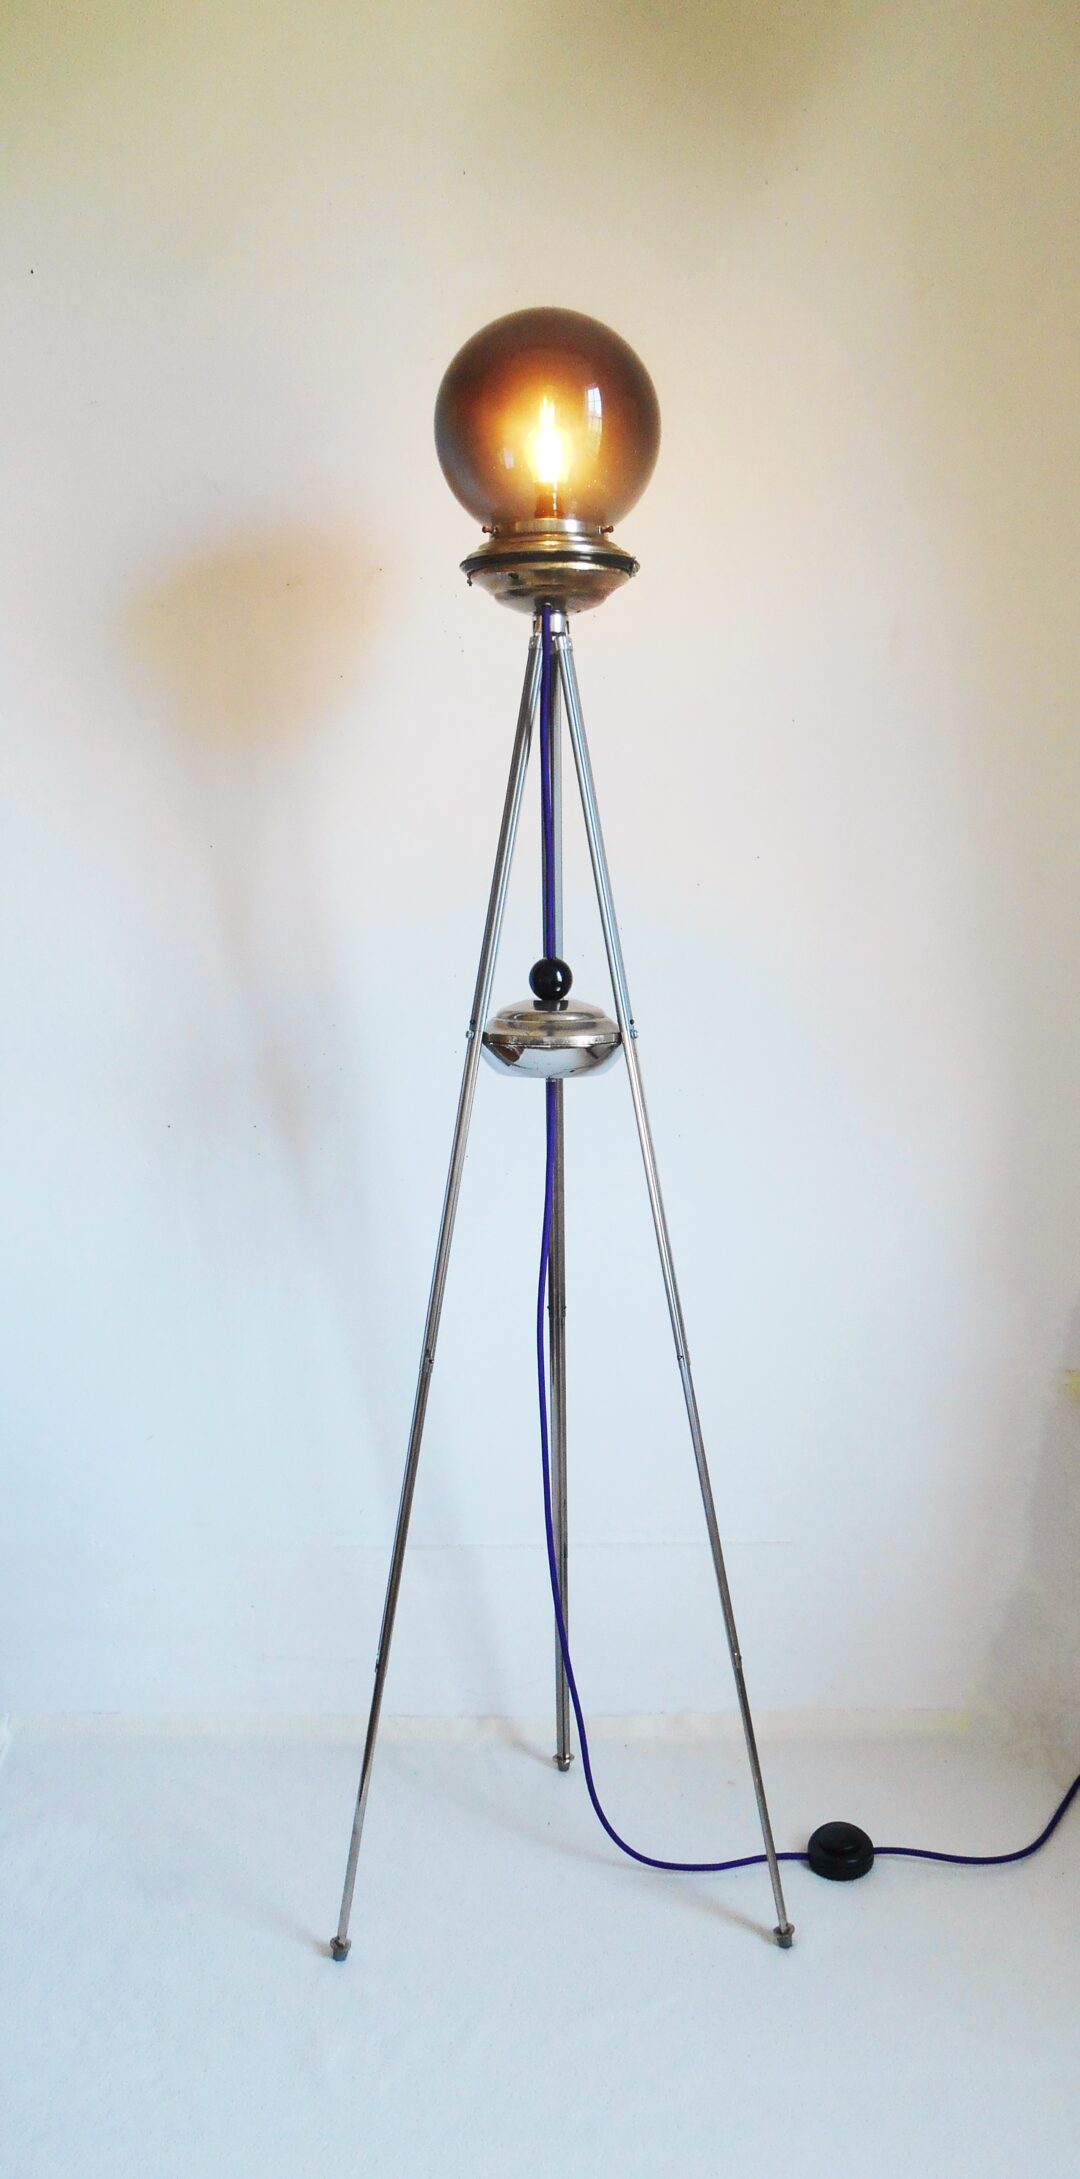 A repurposed tripod lamp with a vintage dark glass shade by Fiona Bradshaw Designs